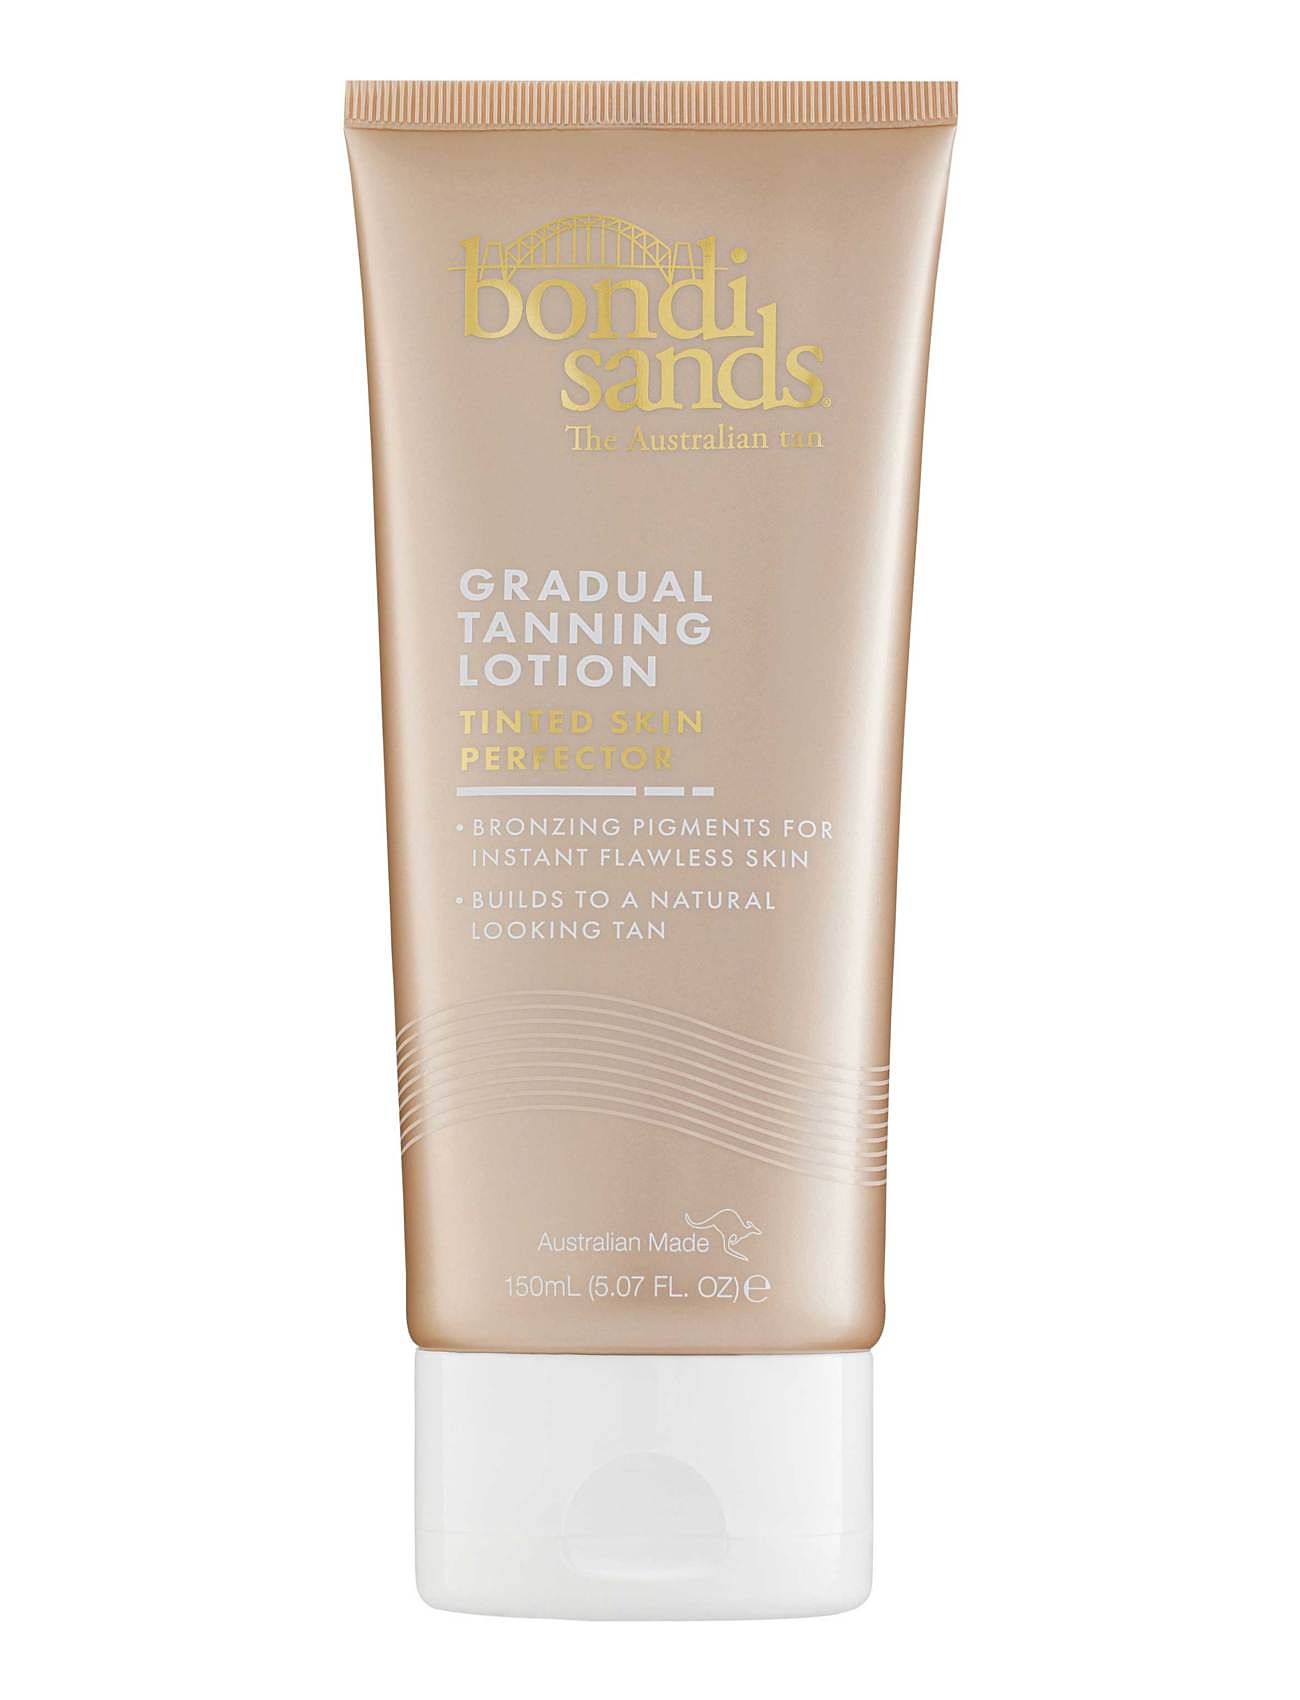 Skin Perfector Gradual Tanning Lotion Beauty Women Skin Care Sun Products Self Tanners Lotions Nude Bondi Sands